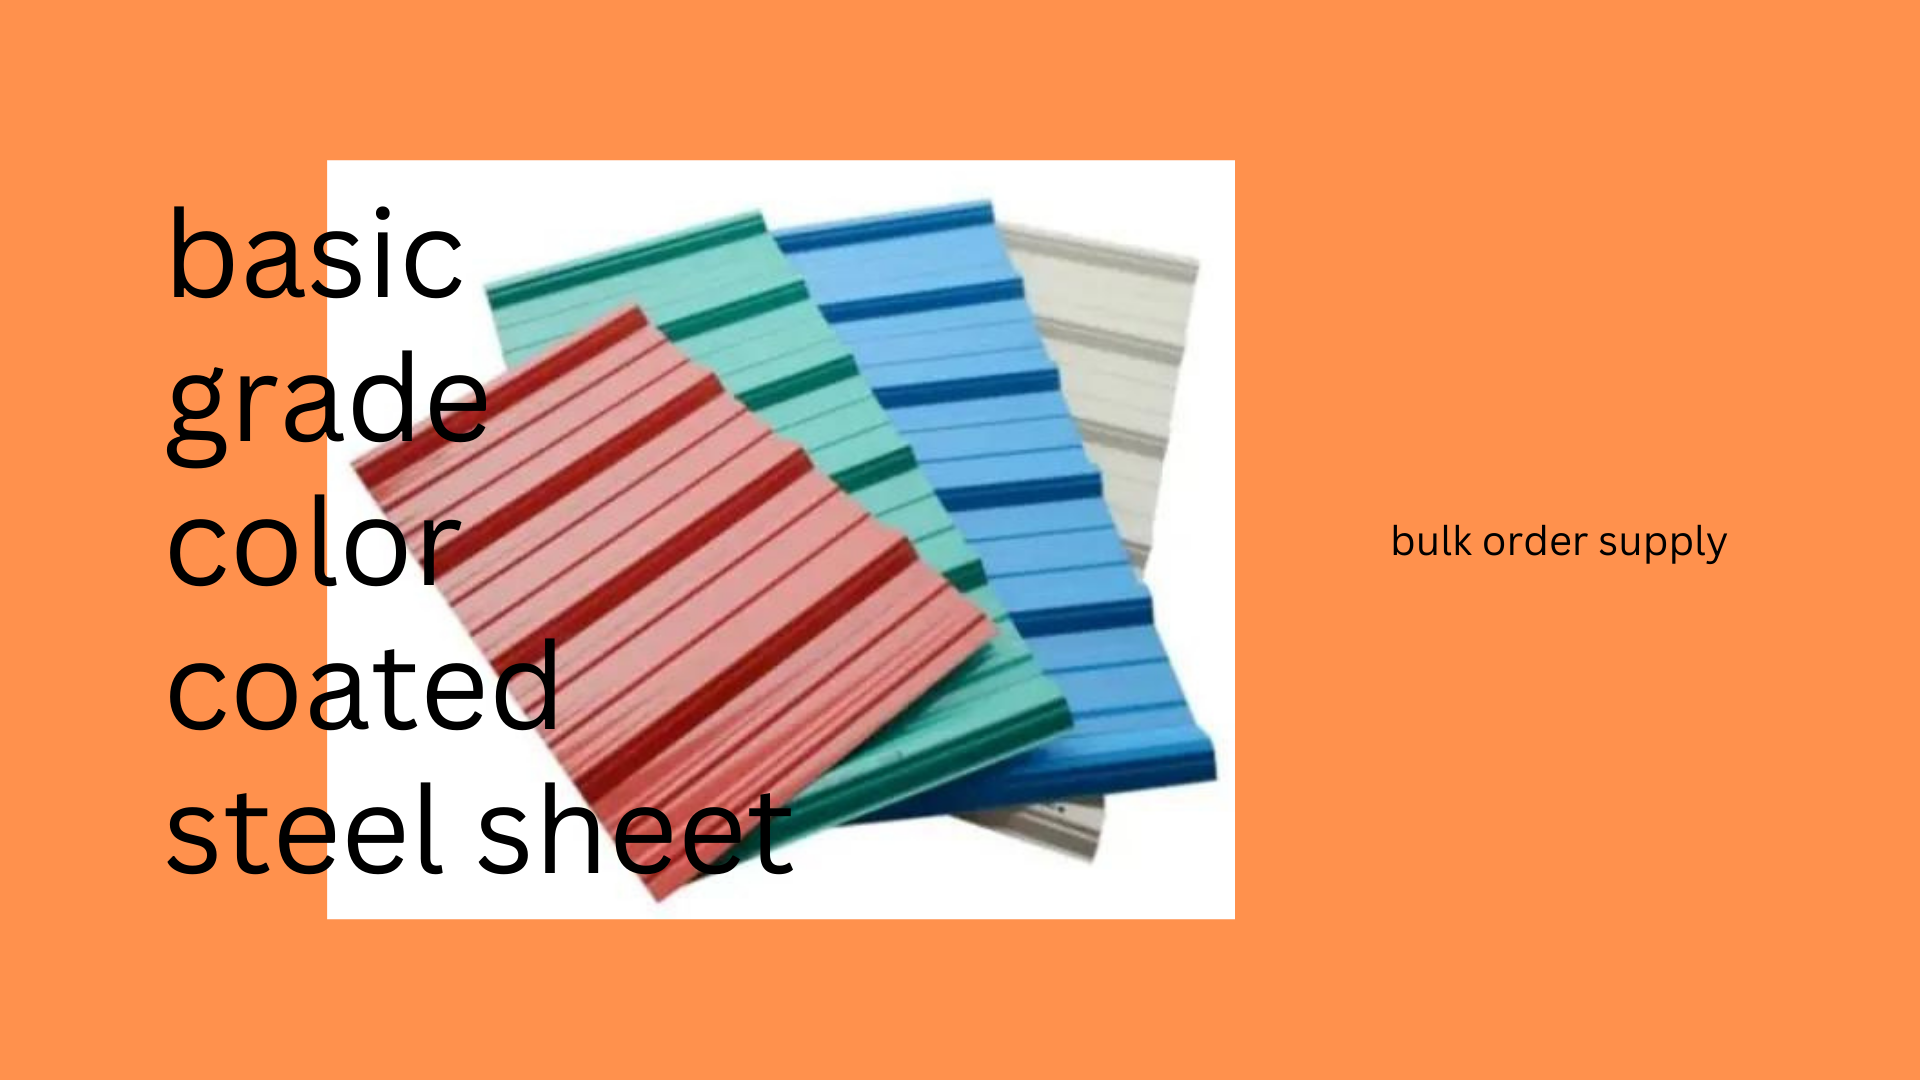 color coated steel sheet supply